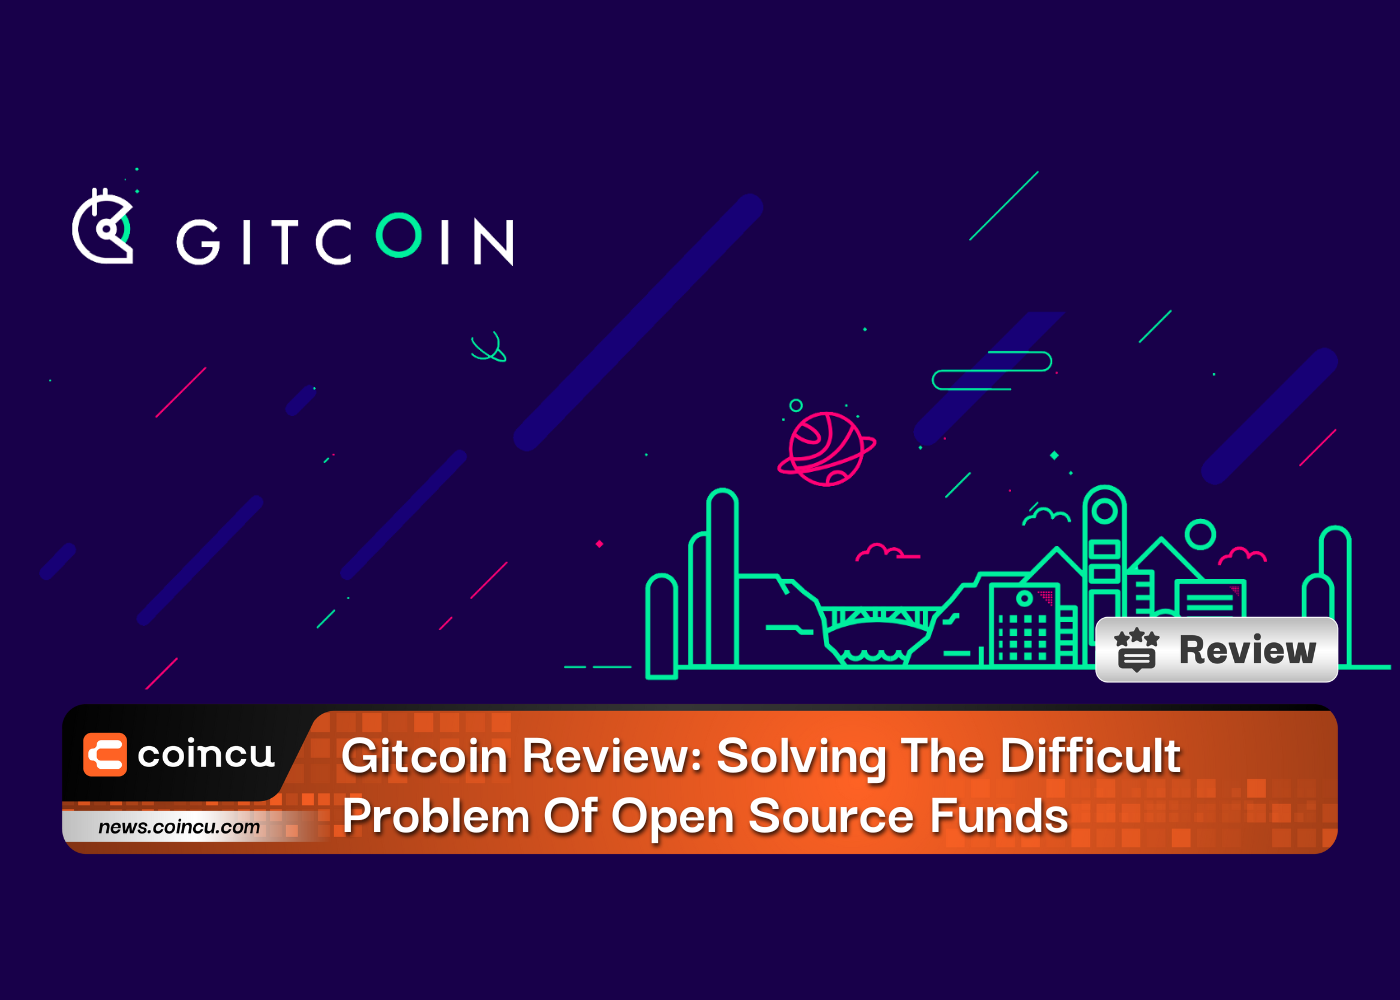 Gitcoin Review: Solving The Difficult Problem Of Open Source Funds